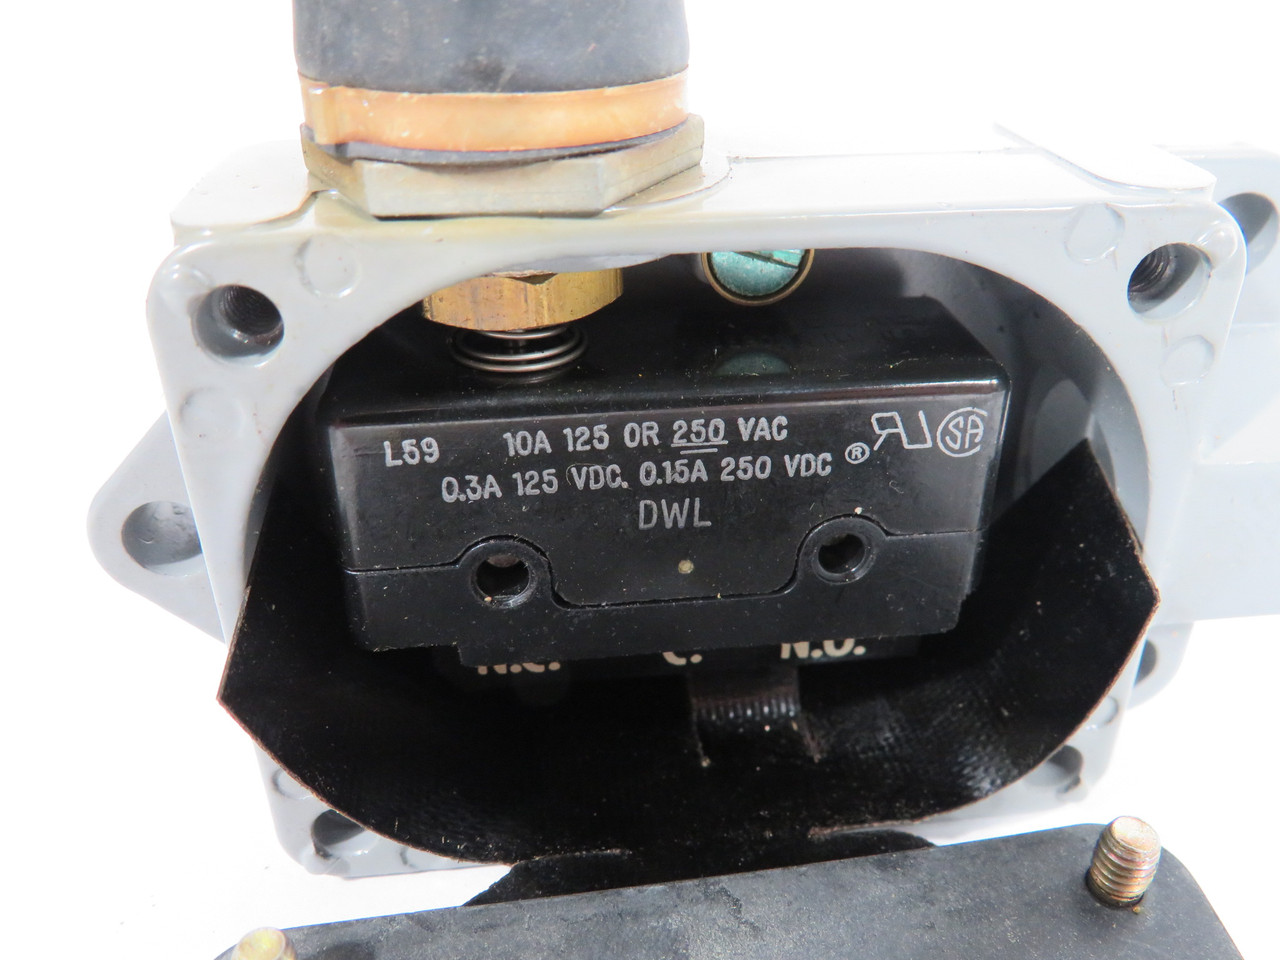 Microswitch DTF2-2RN-LH Limit Switch 10A 125/250VAC 0.3/0.15A 125/250VDC NOP